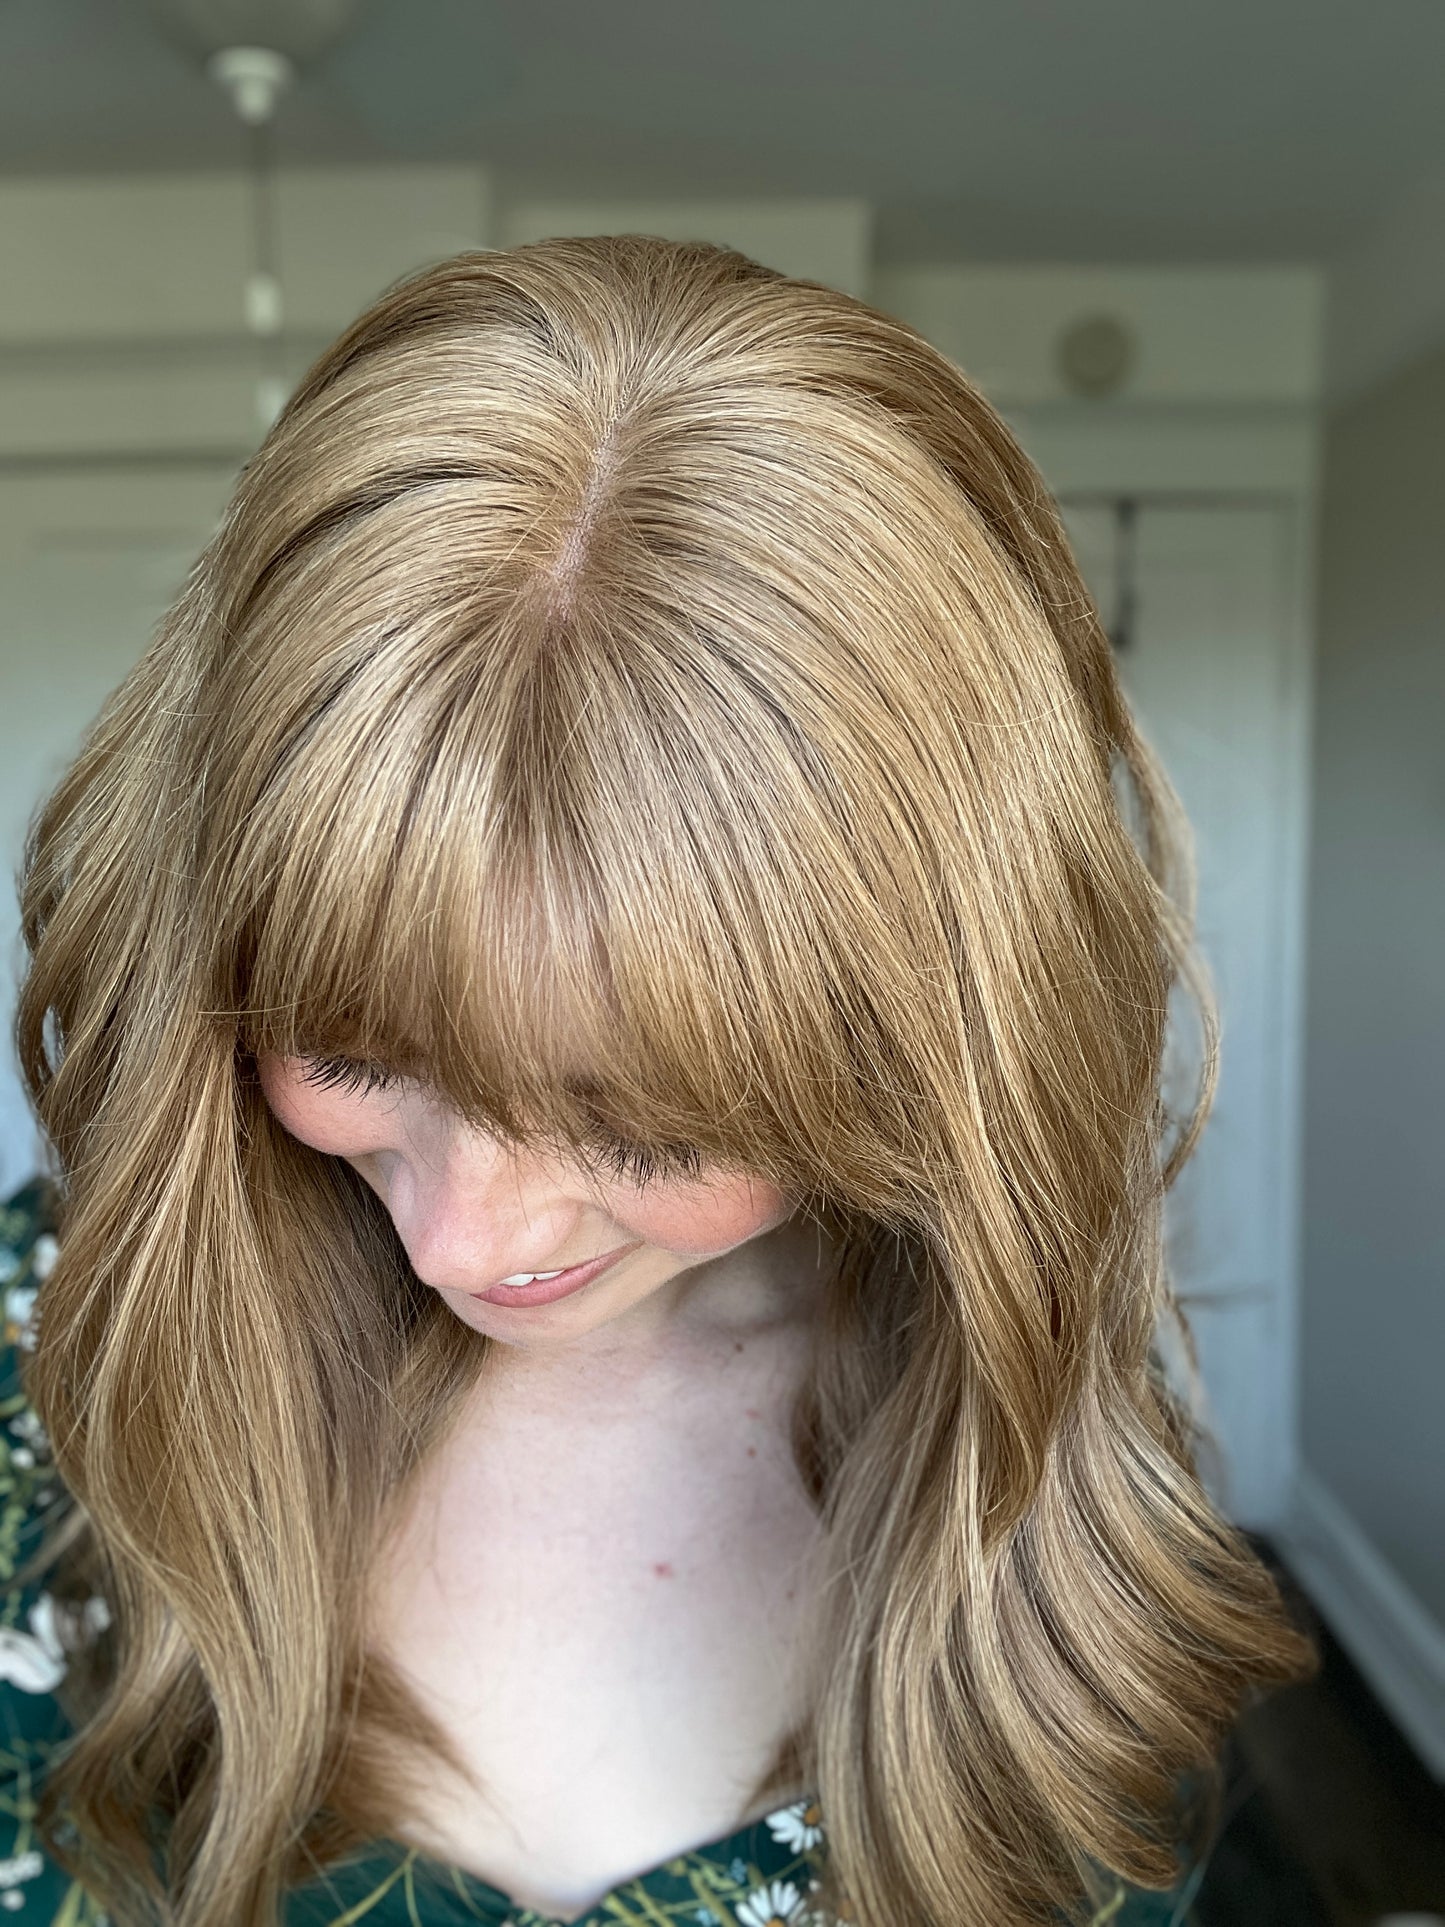 Angelic With Bangs // 18 inches // Medium